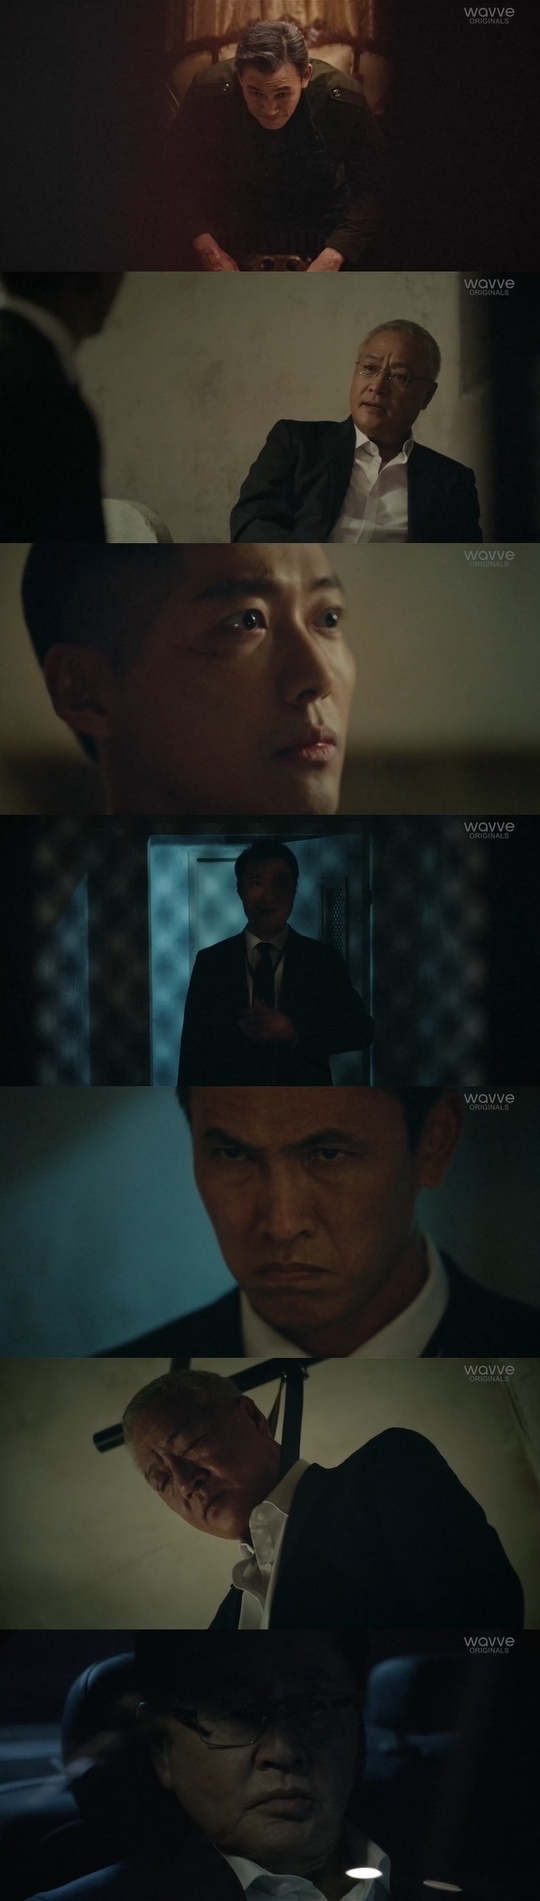 Both Namgoong Min and Lee Gyeung-young played to Yu Oh-seong.In the 10th MBC gilt drama The Veil (playplayed by Park Seok-ho, directed by Kim Sung-yong), which was broadcast on October 16, all the truths about the death of a colleague of Han Ji-hyuk (Namgoong Min) in Shenyang a year ago were revealed.Han Ji-hyuk of the past in the video said, It was Han Ji-hyuk who killed your colleague Agnaldo Timóteo and told the truth of Agnaldo Timóteo a year ago.Lee Chun-gil (Lee Jae-gyun), who visited the safe house at the time, told Han Ji-hyuk that one of Oh Gyeong-seok (Hwang Hee-hee) Kim Dong-wook (Jo Bok-rae) was leaking information to the outside, saying, We keep our destination secret to our colleagues, and Hwang Mo-sul (Sung No-jin) advised him to move to Shenyang where he will play a big game.However, Han Ji-hyuk did not follow the advice and went to Shenyang with Oh Gyeong-seok and Kim Dong-wook.Han Ji-hyuk and his colleagues watched the big edition of Hwang Mo-sul, and noticed that some kind of incident was being carried out by NIS black agent Jang Chun-woo (Jung Mun-sung) and North Koreas big-name Lee Dong-cheol.Han Ji-hyuk suspected Oh Gyeong-seok, Kim Dong-wook and the two of them endlessly while watching them.After that, a suspicious movement was detected, and Oh Gyeong-seok and Kim Dong-wook were sent to the hotel where Lee Dong-chul stayed, and suddenly the team members and radio were cut off.Han Ji-hyuk rushed to the hotel room and made a fade to black with a dead Lee Dong-cheol and a hand-covered Kim Dong-wook.Han Ji-hyuk fled Kim Dong-wook, who insisted on innocence, saying, It is not me, and escaped from the public security and avoided himself.Han Ji-hyuk returned to the hostel one step later and then made Kim Dong-wook Oh Gyeong-seok face to face with a gun pointed at each other.Han Ji-hyuk also took out the gun and killed Kim Dong-wook first by shooting Oh Gyeong-seok when he was wary of the two.Han Ji-hyuks suspicion was that Kim Dong-wook was more weighted to the betrayer.Han Ji-hyuk did not hesitate when Kim Dong-wook fired a bullet at him, but he shot himself, but Oh Gyeong-seok killed him.Han Ji-hyuk, who noticed that Kim Dong-wook was not a traitor, was turned into madness.Han Ji-hyuk of the past sent the current Han Ji-hyuk back to the NIS in order to take revenge on a rat who could not think of it.Han Ji-hyuk in the video said, You must kill him. If he is in front of you now, you do not have to hesitate.Im gonna kill you, take your memory, and take out your vengeance frustration and despair. Never miss it. You have to kill it.Han Ji-hyuk fired a gun at Lee In-hwans men, almost as if he were having a seizure, but he fell into a headache and did not kill Lee In-hwan.In the end, Han Ji-hyuk was arrested and detained by domestic part-time forces and was referred to the disciplinary committee by Lee In-hwan.Overseas Part Kang Pil-ho (Kim Jong-tae) Ha Dong Kyun (Kim Do-hyun) traced the secretly operated Irgos situation room and the lab in Planet, but it had already disappeared without trace.Lee In-hwan was asked to release Han Ji-hyuk by Kang Pil-ho, who was planning to put his family in the position of deputy director of overseas part.Kang Pil-ho, who cannot be said much, accepted this proposal.Han Ji-hyuk, who was released afterwards, went to see Do Jin-sook (Jang Young-nam), who knew the truth of the case, and Do Jin-sook only then informed all the truth.Oh Gyeong-seok was a member of the business association under the direction of Lee In-hwan, and the killing of Lee Dong-chul was also the work of Oh Gyeong-seok. Kim Dong-wook killed Oh Gyeong-seok because of Do Jin-sooks order.Han Ji-hyuk, who learned the truth, cooperated with Kang Pil-ho, Ha Dong Kyun, and Yoo Jessie J (Kim Ji-eun).Yoo Jessie J has found that there are three similar accidents, starting with the sudden accident that Park Young-joo and Kang Pil-ho had earlier.The common point of the three people who died in the accident is that they initiated and urged the passage of a bill that regulates corporate personal information Lee Yong.Han Ji-hyuk speculated that Lee In-hwan received a vast amount of personal information in return for blocking the passage of the bill. He was a murder teacher of Planet representative (Lee Jun-hyuk).Han Ji-hyuk, Kang Pil-ho, Ha Dong Kyun, and Yoo Jessie J played Lee Yong-tae (Kim Min-sang) with Lee In-hwan as double spy.Jung Yong-tae was a pre-installed eavesdropping program that Lee In-hwan set up to pretend to be Lee In-hwans Spy. He handed over all of his words to Han Ji-hyuk, Kang Pil-ho, Ha Dong Kyun and Yoo Jessie J.In the meantime, Lee In-hwan said that Jung Yong-tae plans to kill the Planet representative after a sudden accident.The representative of Planet, who delivered this, eventually handed over all the evidence related to the business association, which would be Lee In-hwans weakness, to Han Ji-hyuk and others.But the reversal continued.Lee In-hwan, who was arrested, informed Han Ji-hyuk that he was actually a back Mohammad Mosaddegh (Yu Oh-seong) rather than Oh Gyeong-Seok.Lee In-hwan said, Although it has been recently revealed, the Duke of North Korea was Lee Dong-chul, who had been in charge of the White Mosaddegh ten years ago.We didnt have to remove Li Dong-chul. Mohammad Mosaddegh had his revenge first. He had other purposes from the beginning.What Baek Mohammad Mosaddegh really wanted was the arrest of NIS at the scene where Lee Dong-cheol was killed.If our agent was arrested as a criminal who killed the highest-ranking North Korean official in the middle of China, there would have been a great diplomatic wave.Back Mohammad Mosaddegh planned to blow up our entire organization, he said.In fact, the back Mohammad Mosaddegh asked for your psychological test data, which probably led to a series of discoveries of you.Once you have doubts, you will have figured out that you are reckless enough to jump into the Ridongcheol hostel.But the back Mohammad Mosaddegh said, I did not expect you to escape there like that. I was all playing with the back Mohammad Mosaddegh.